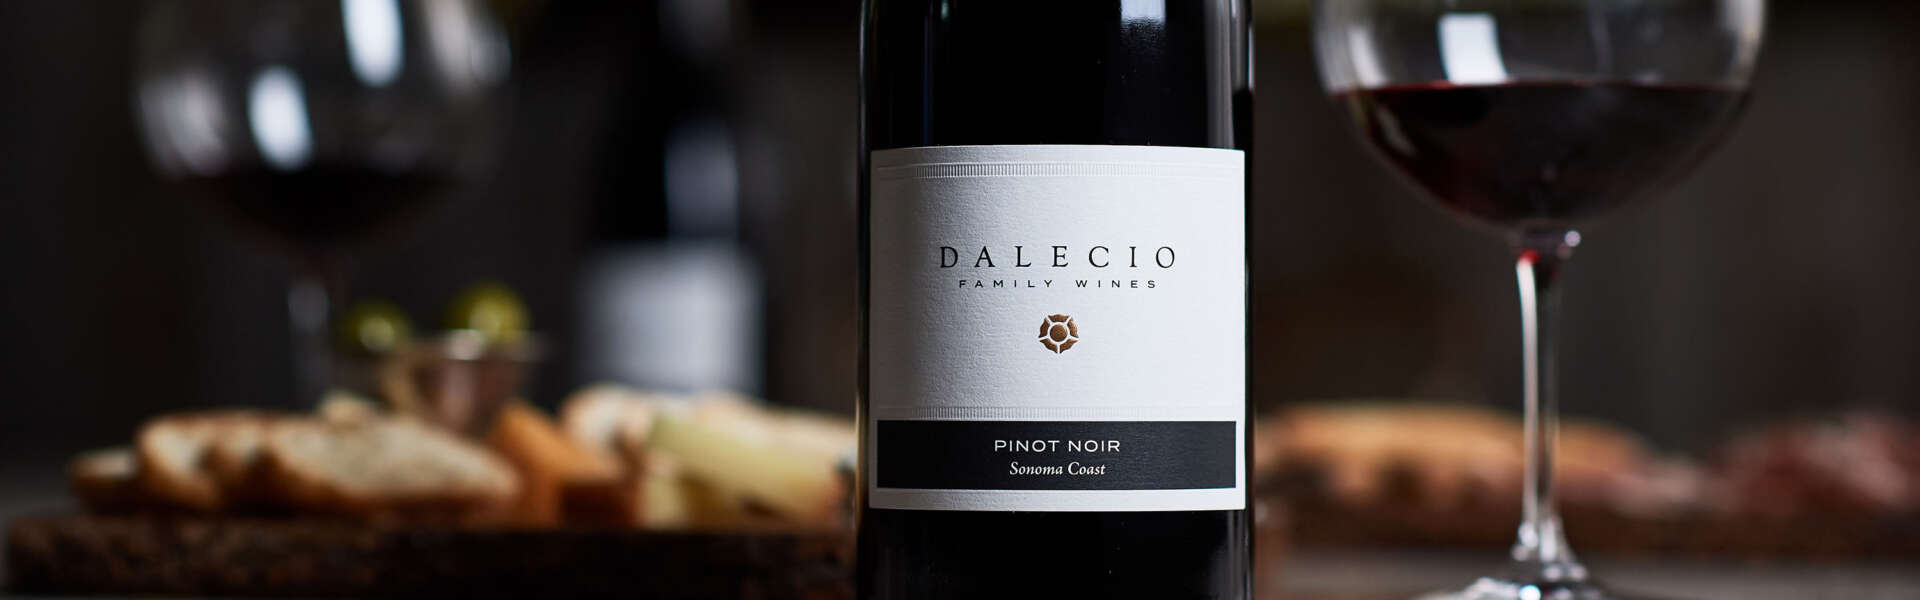 Dalecio Pinot Noir on table with glass